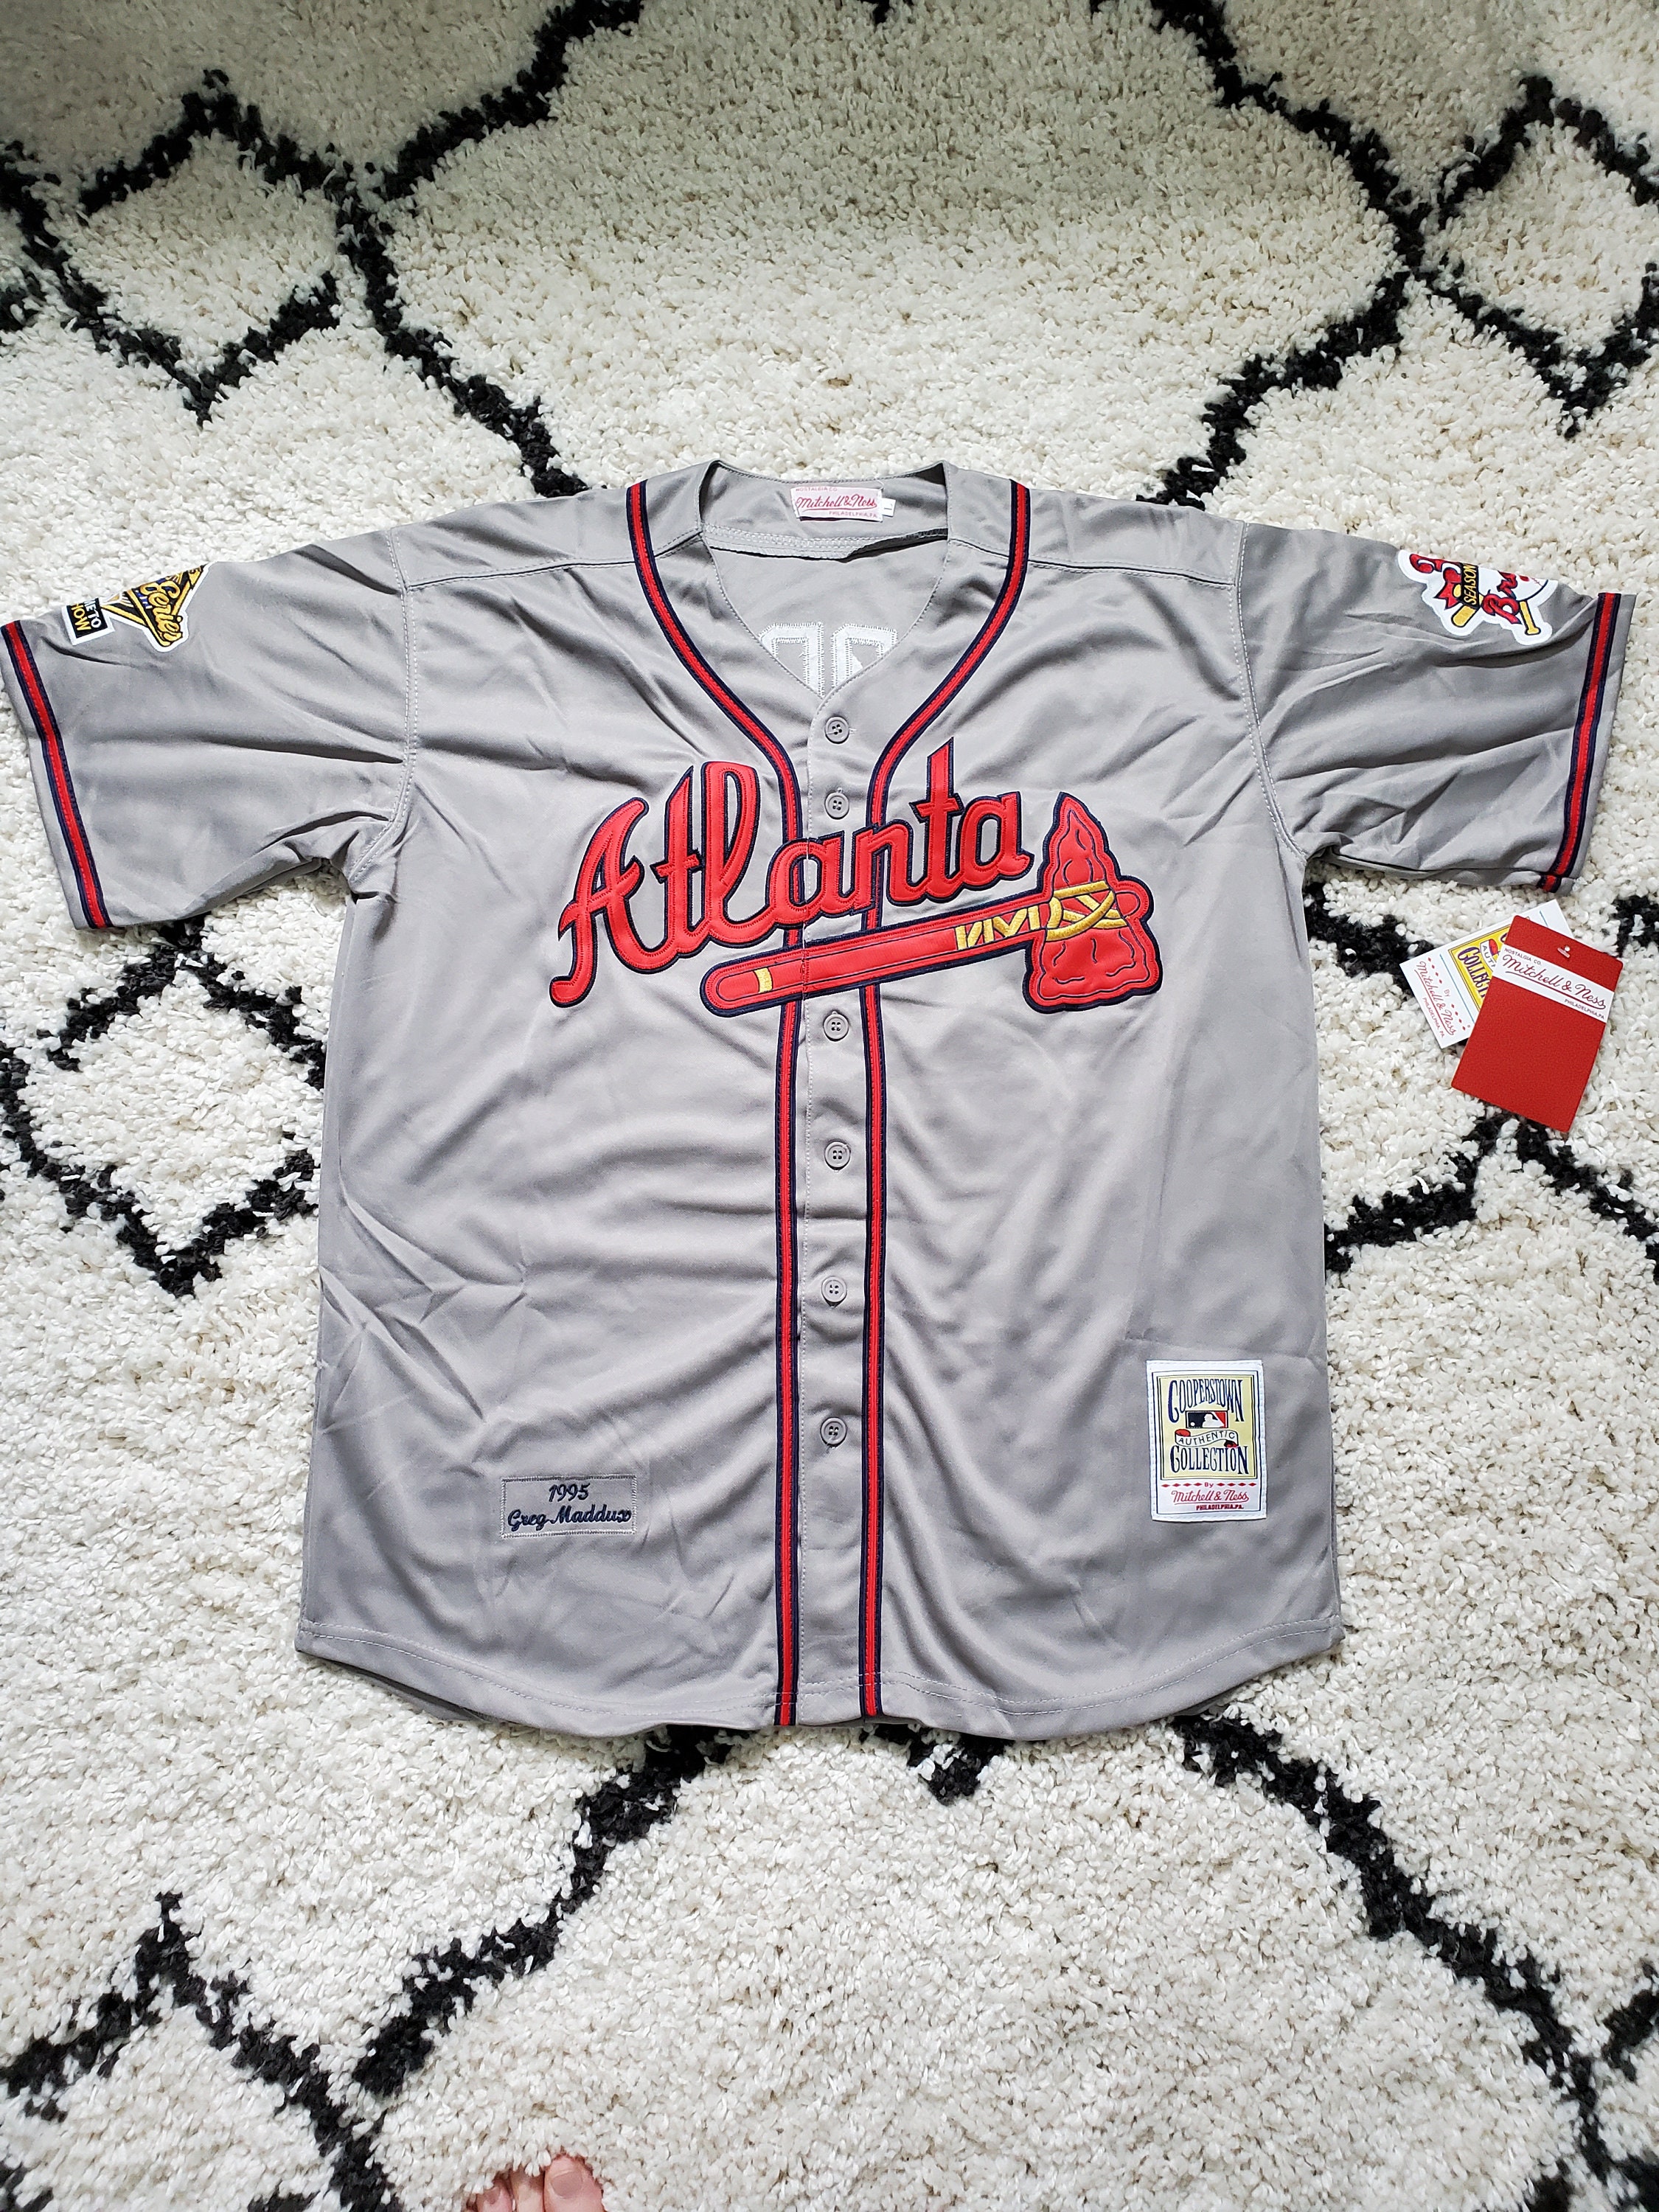 Dansby Swanson MLB Authenticated and Game-Used 1974 Style Jersey